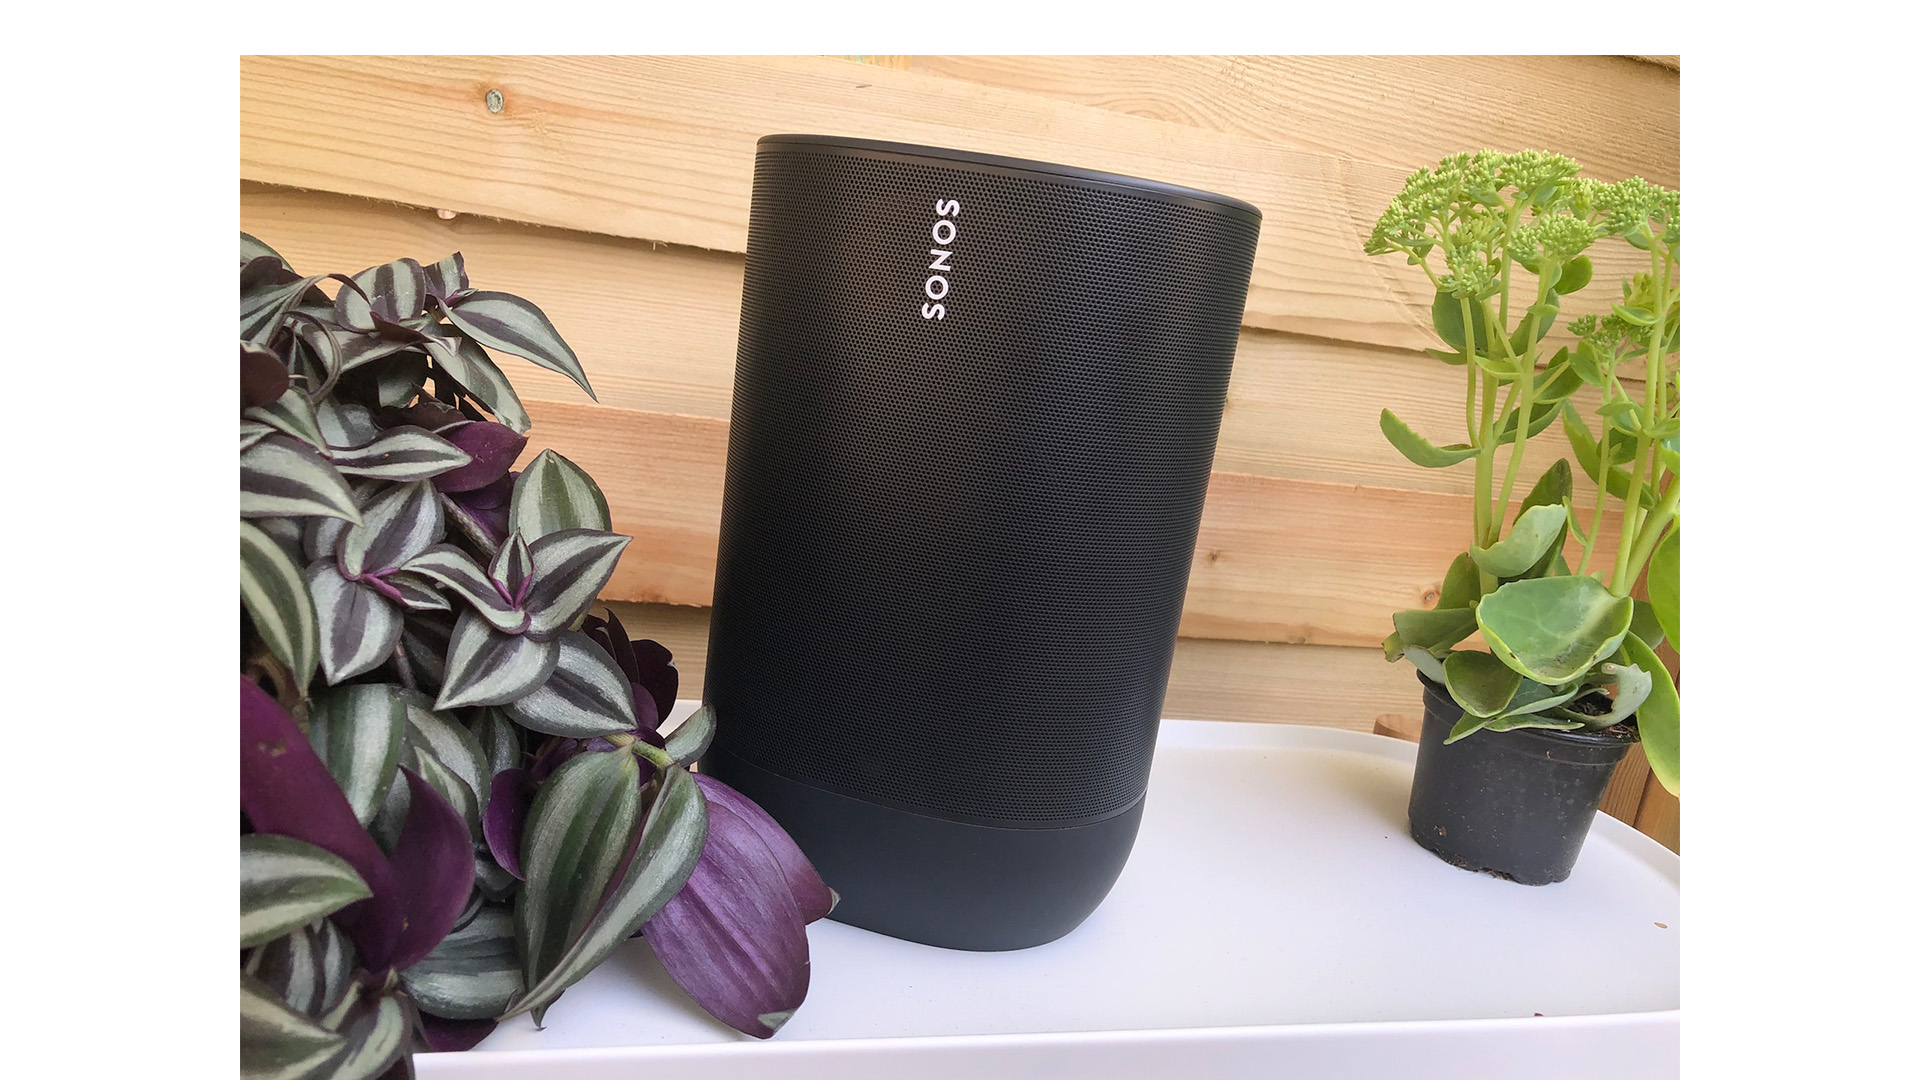 sonos-is-working-on-a-mini-move-bluetooth-speaker,-filing-shows